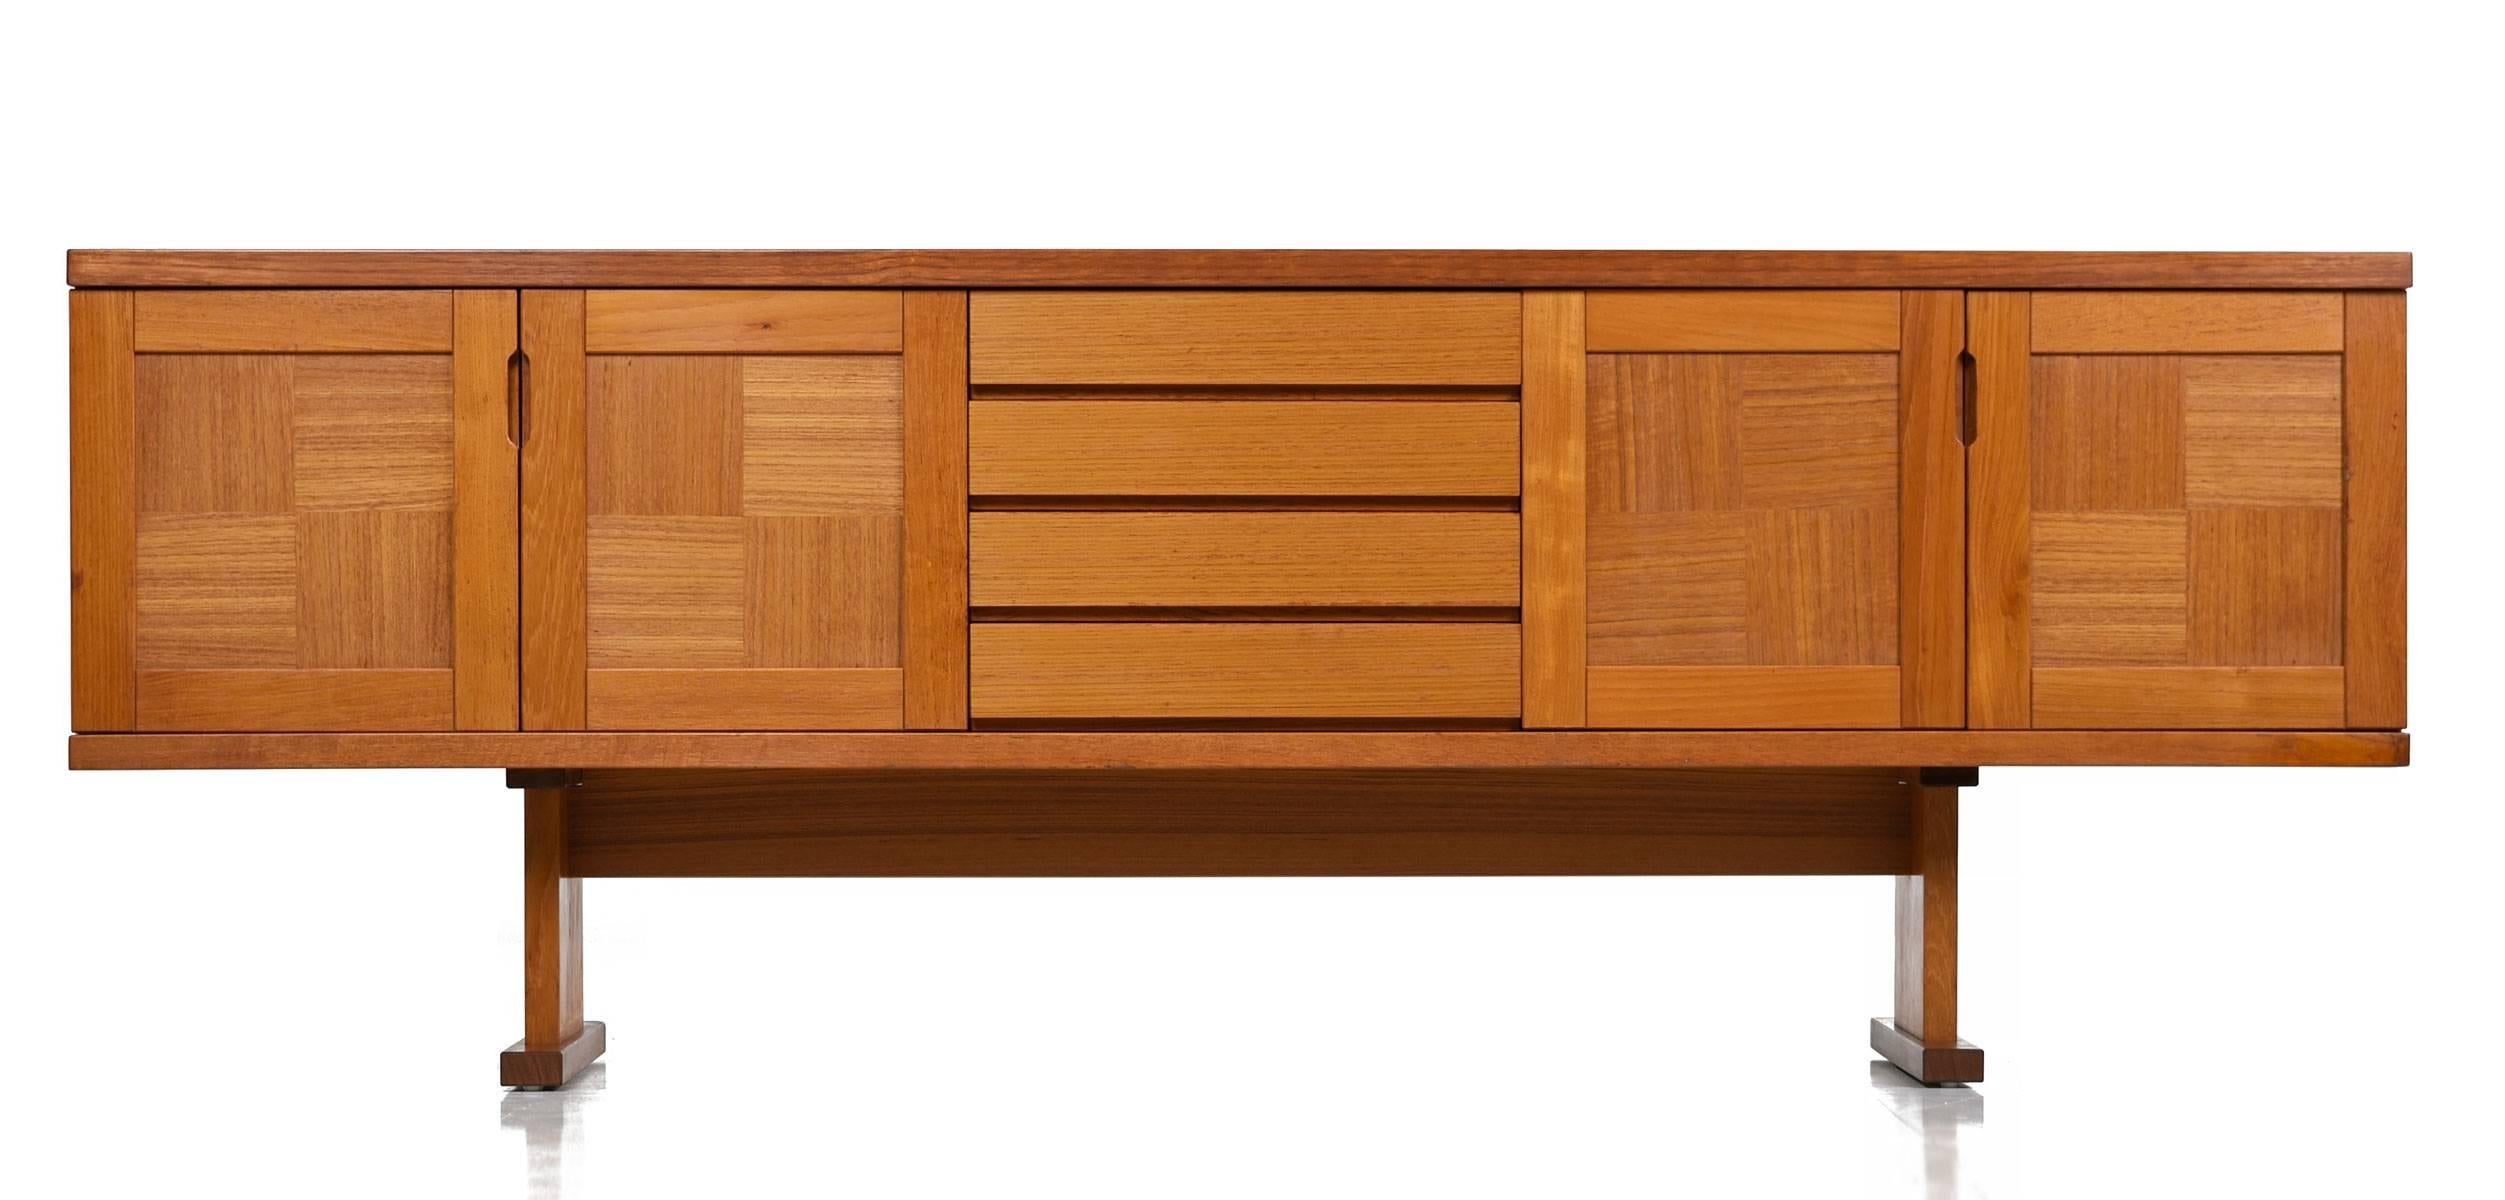 This long Danish teak credenza would be perfect in a living room as an entertainment console or in the dining room as a traditional buffet. The autumnal themed tiles complement the parquet wood patterns on the cabinet doors. These unique and